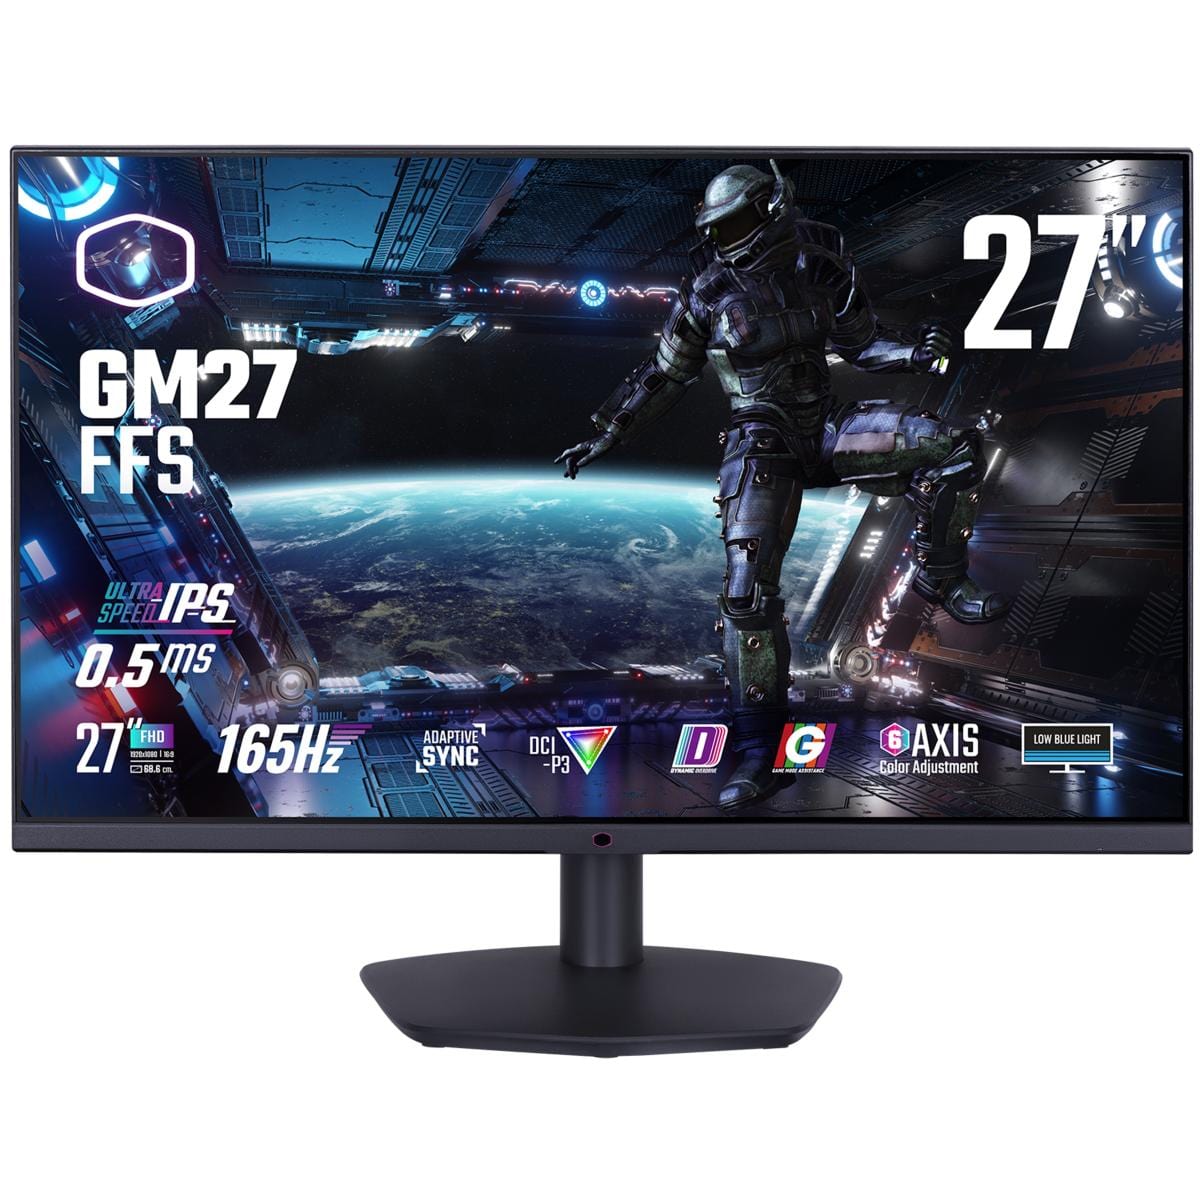 COOLER MASTER Computer Monitors Cooler Master (GM27-FFS) 27" FHD Flat Gaming Monitor, Ultra-Speed IPS, 165Hz, 0.5ms, HDR10, DCI-P3 90% sRGB 120%, G-Sync Compatible